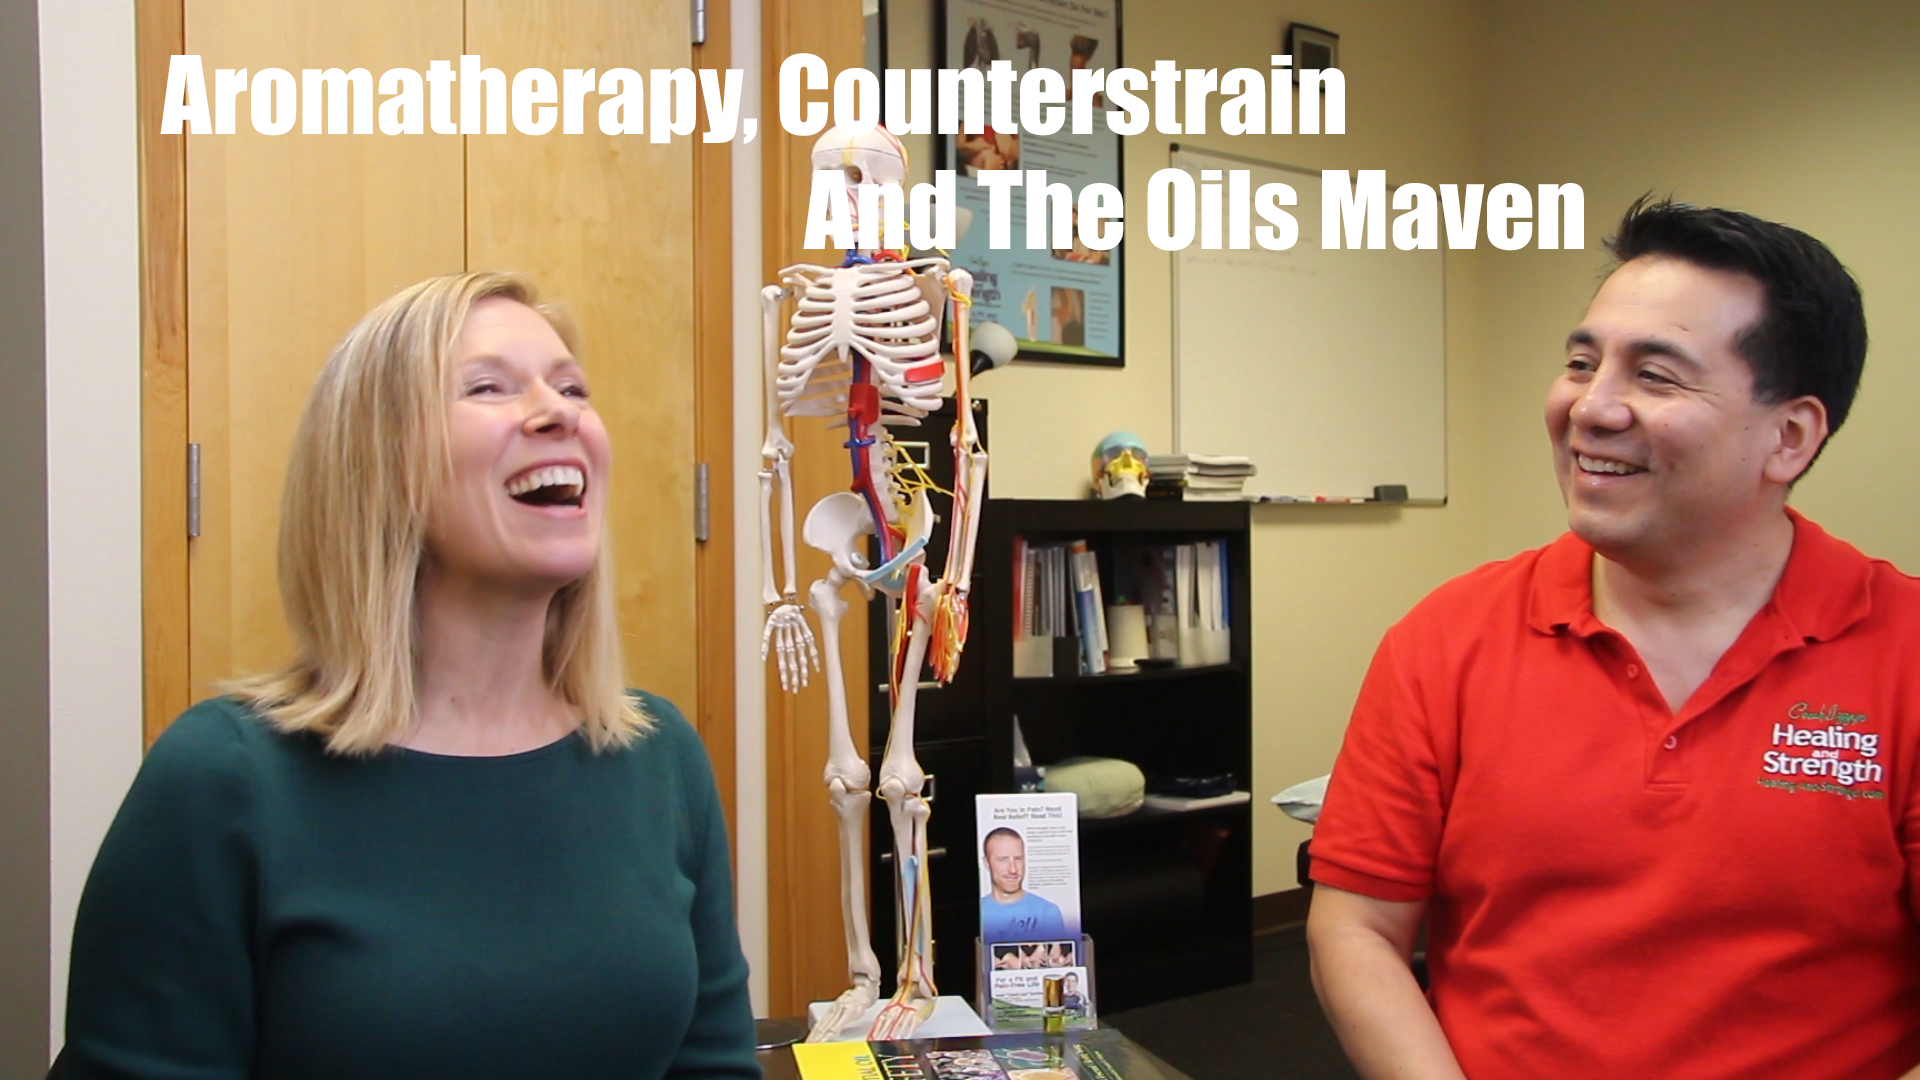 Aromatherapy, Counterstrain, and The Oils Maven